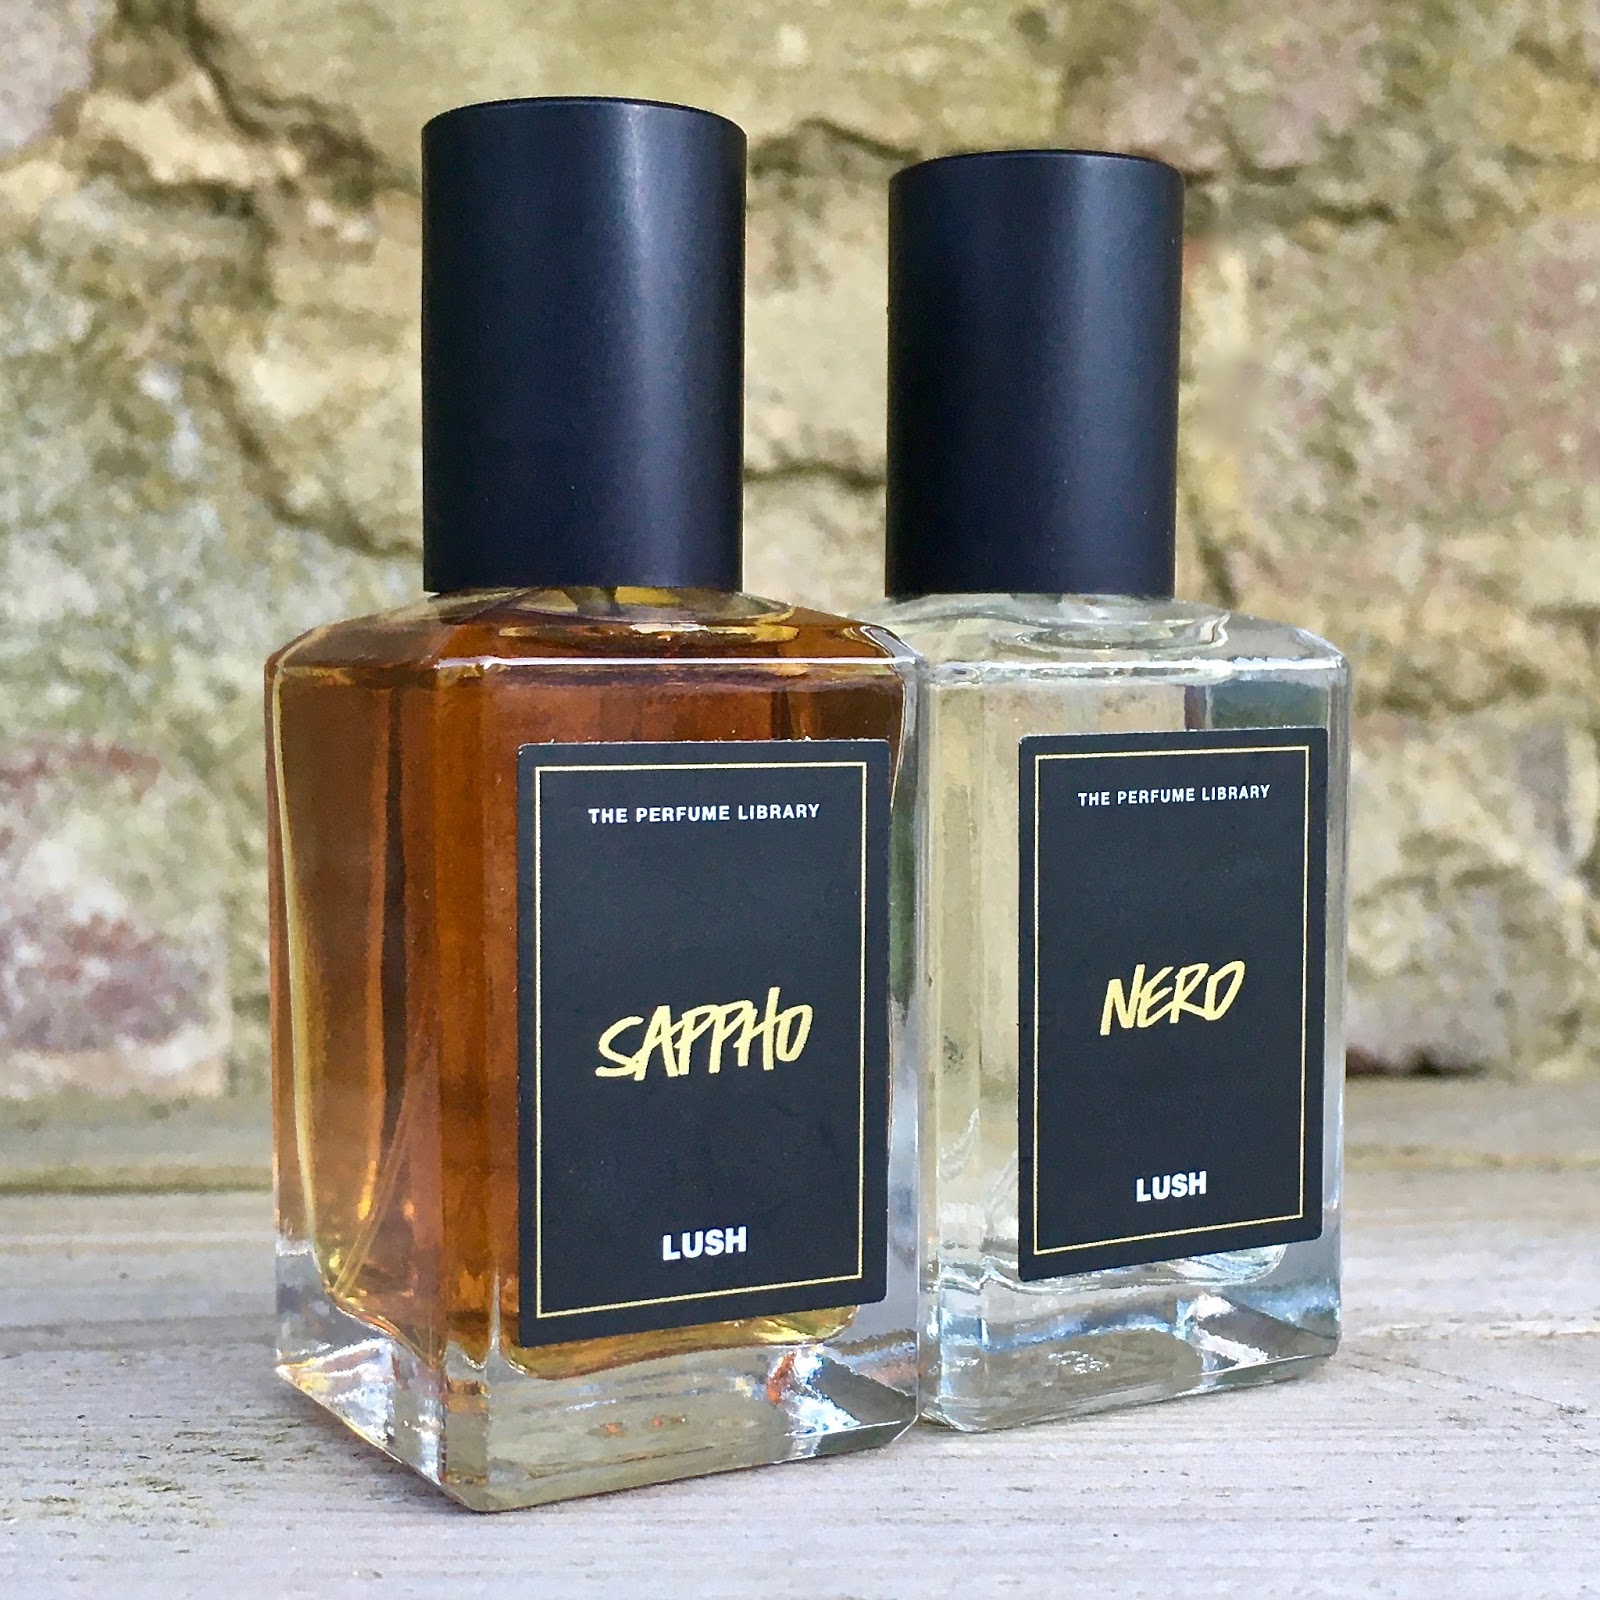 SAPPHO and NERO by Lush